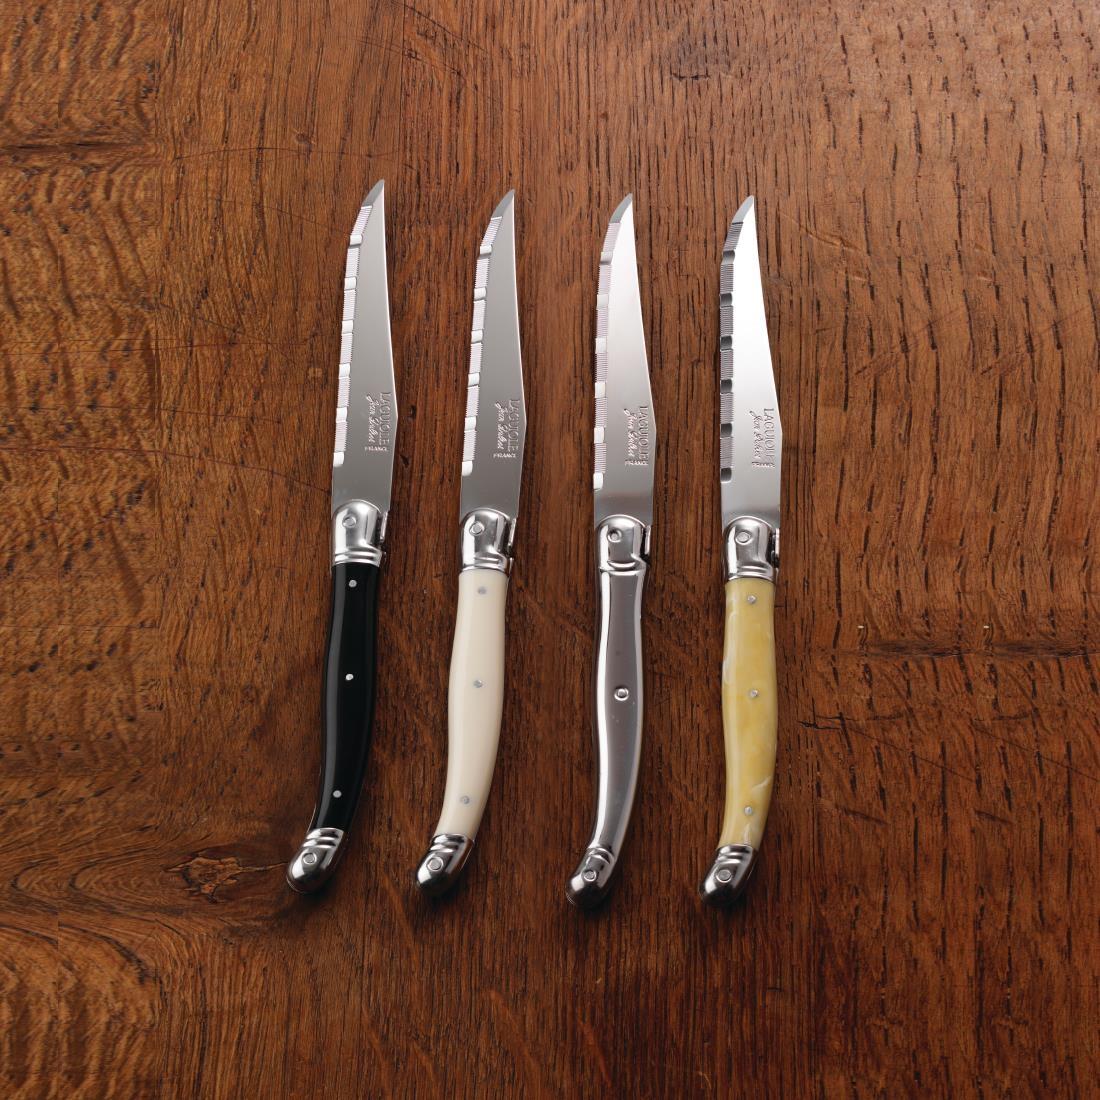 Laguiole Serrated Steak Knife Stainless Steel Handle (Pack of 6) - V598  - 2